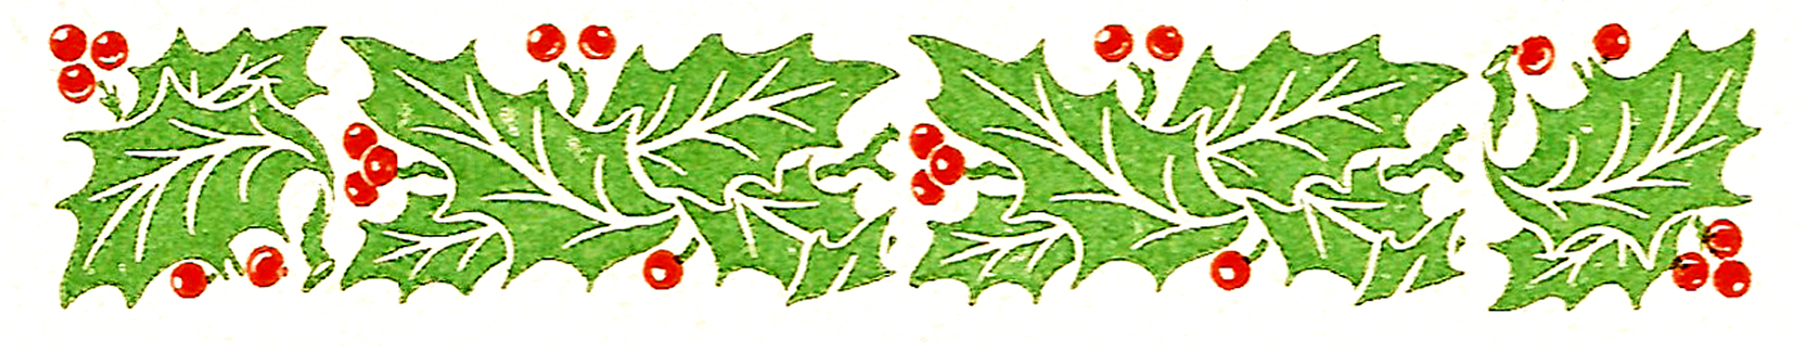 free clipart christmas holly leaves - photo #39